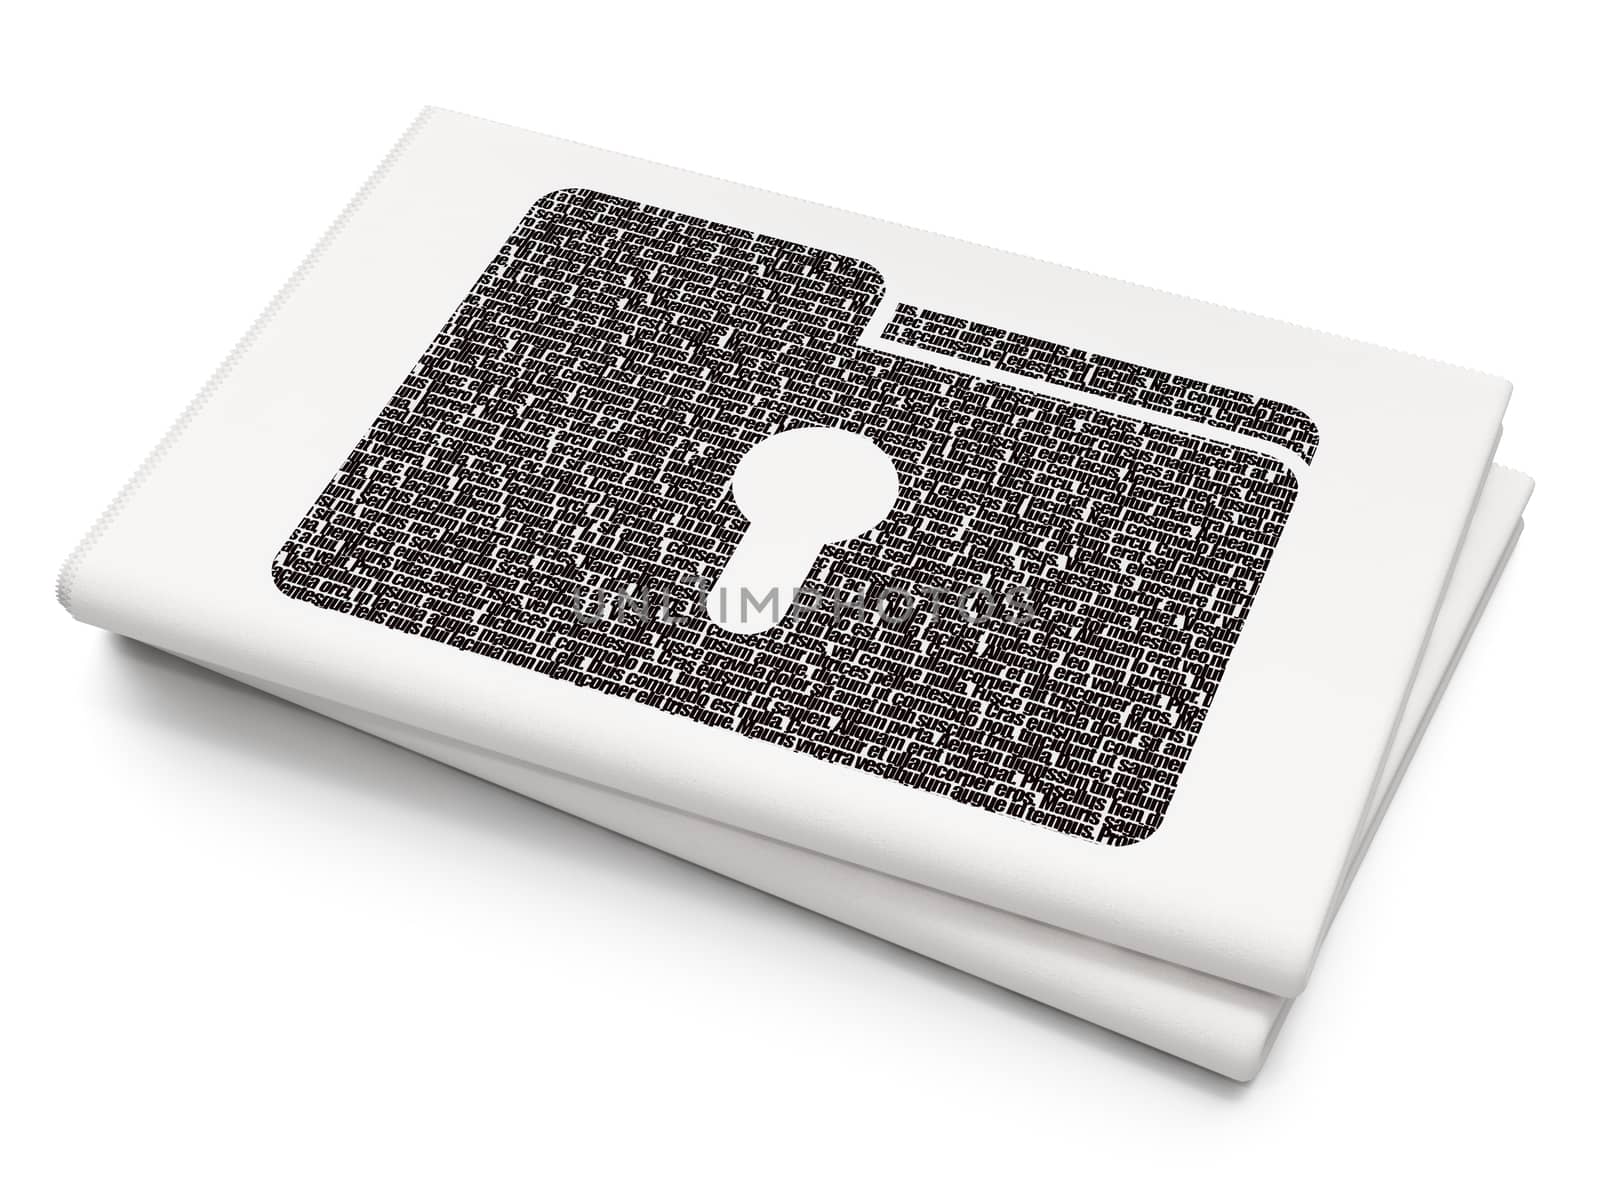 Business concept: Pixelated black Folder With Keyhole icon on Blank Newspaper background, 3D rendering